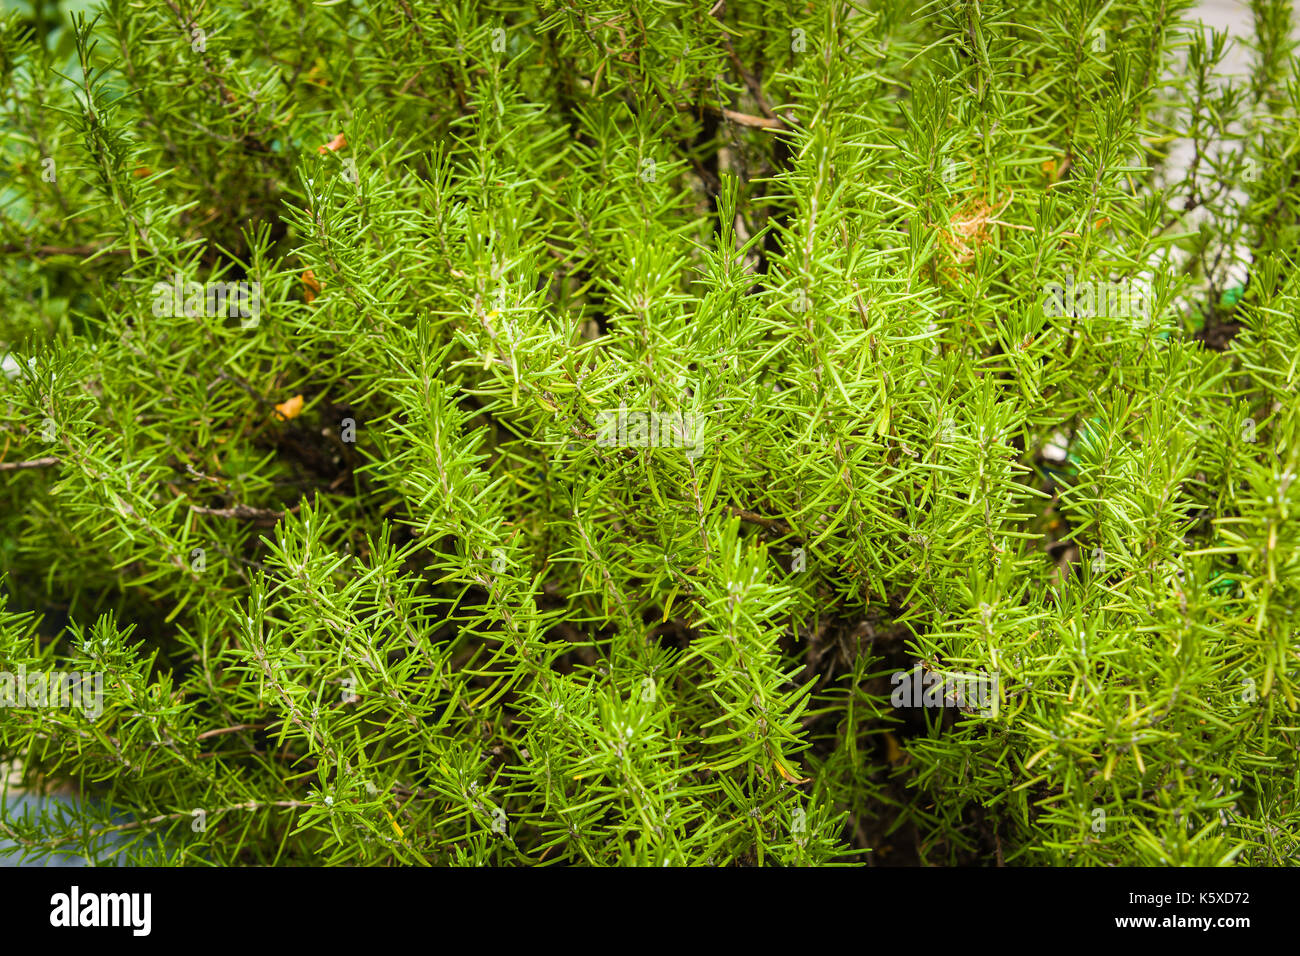 Herbs used in the kitchen: Rosemary (Rosmarinus officinalis). The concept of healthy balanced meals. Stock Photo